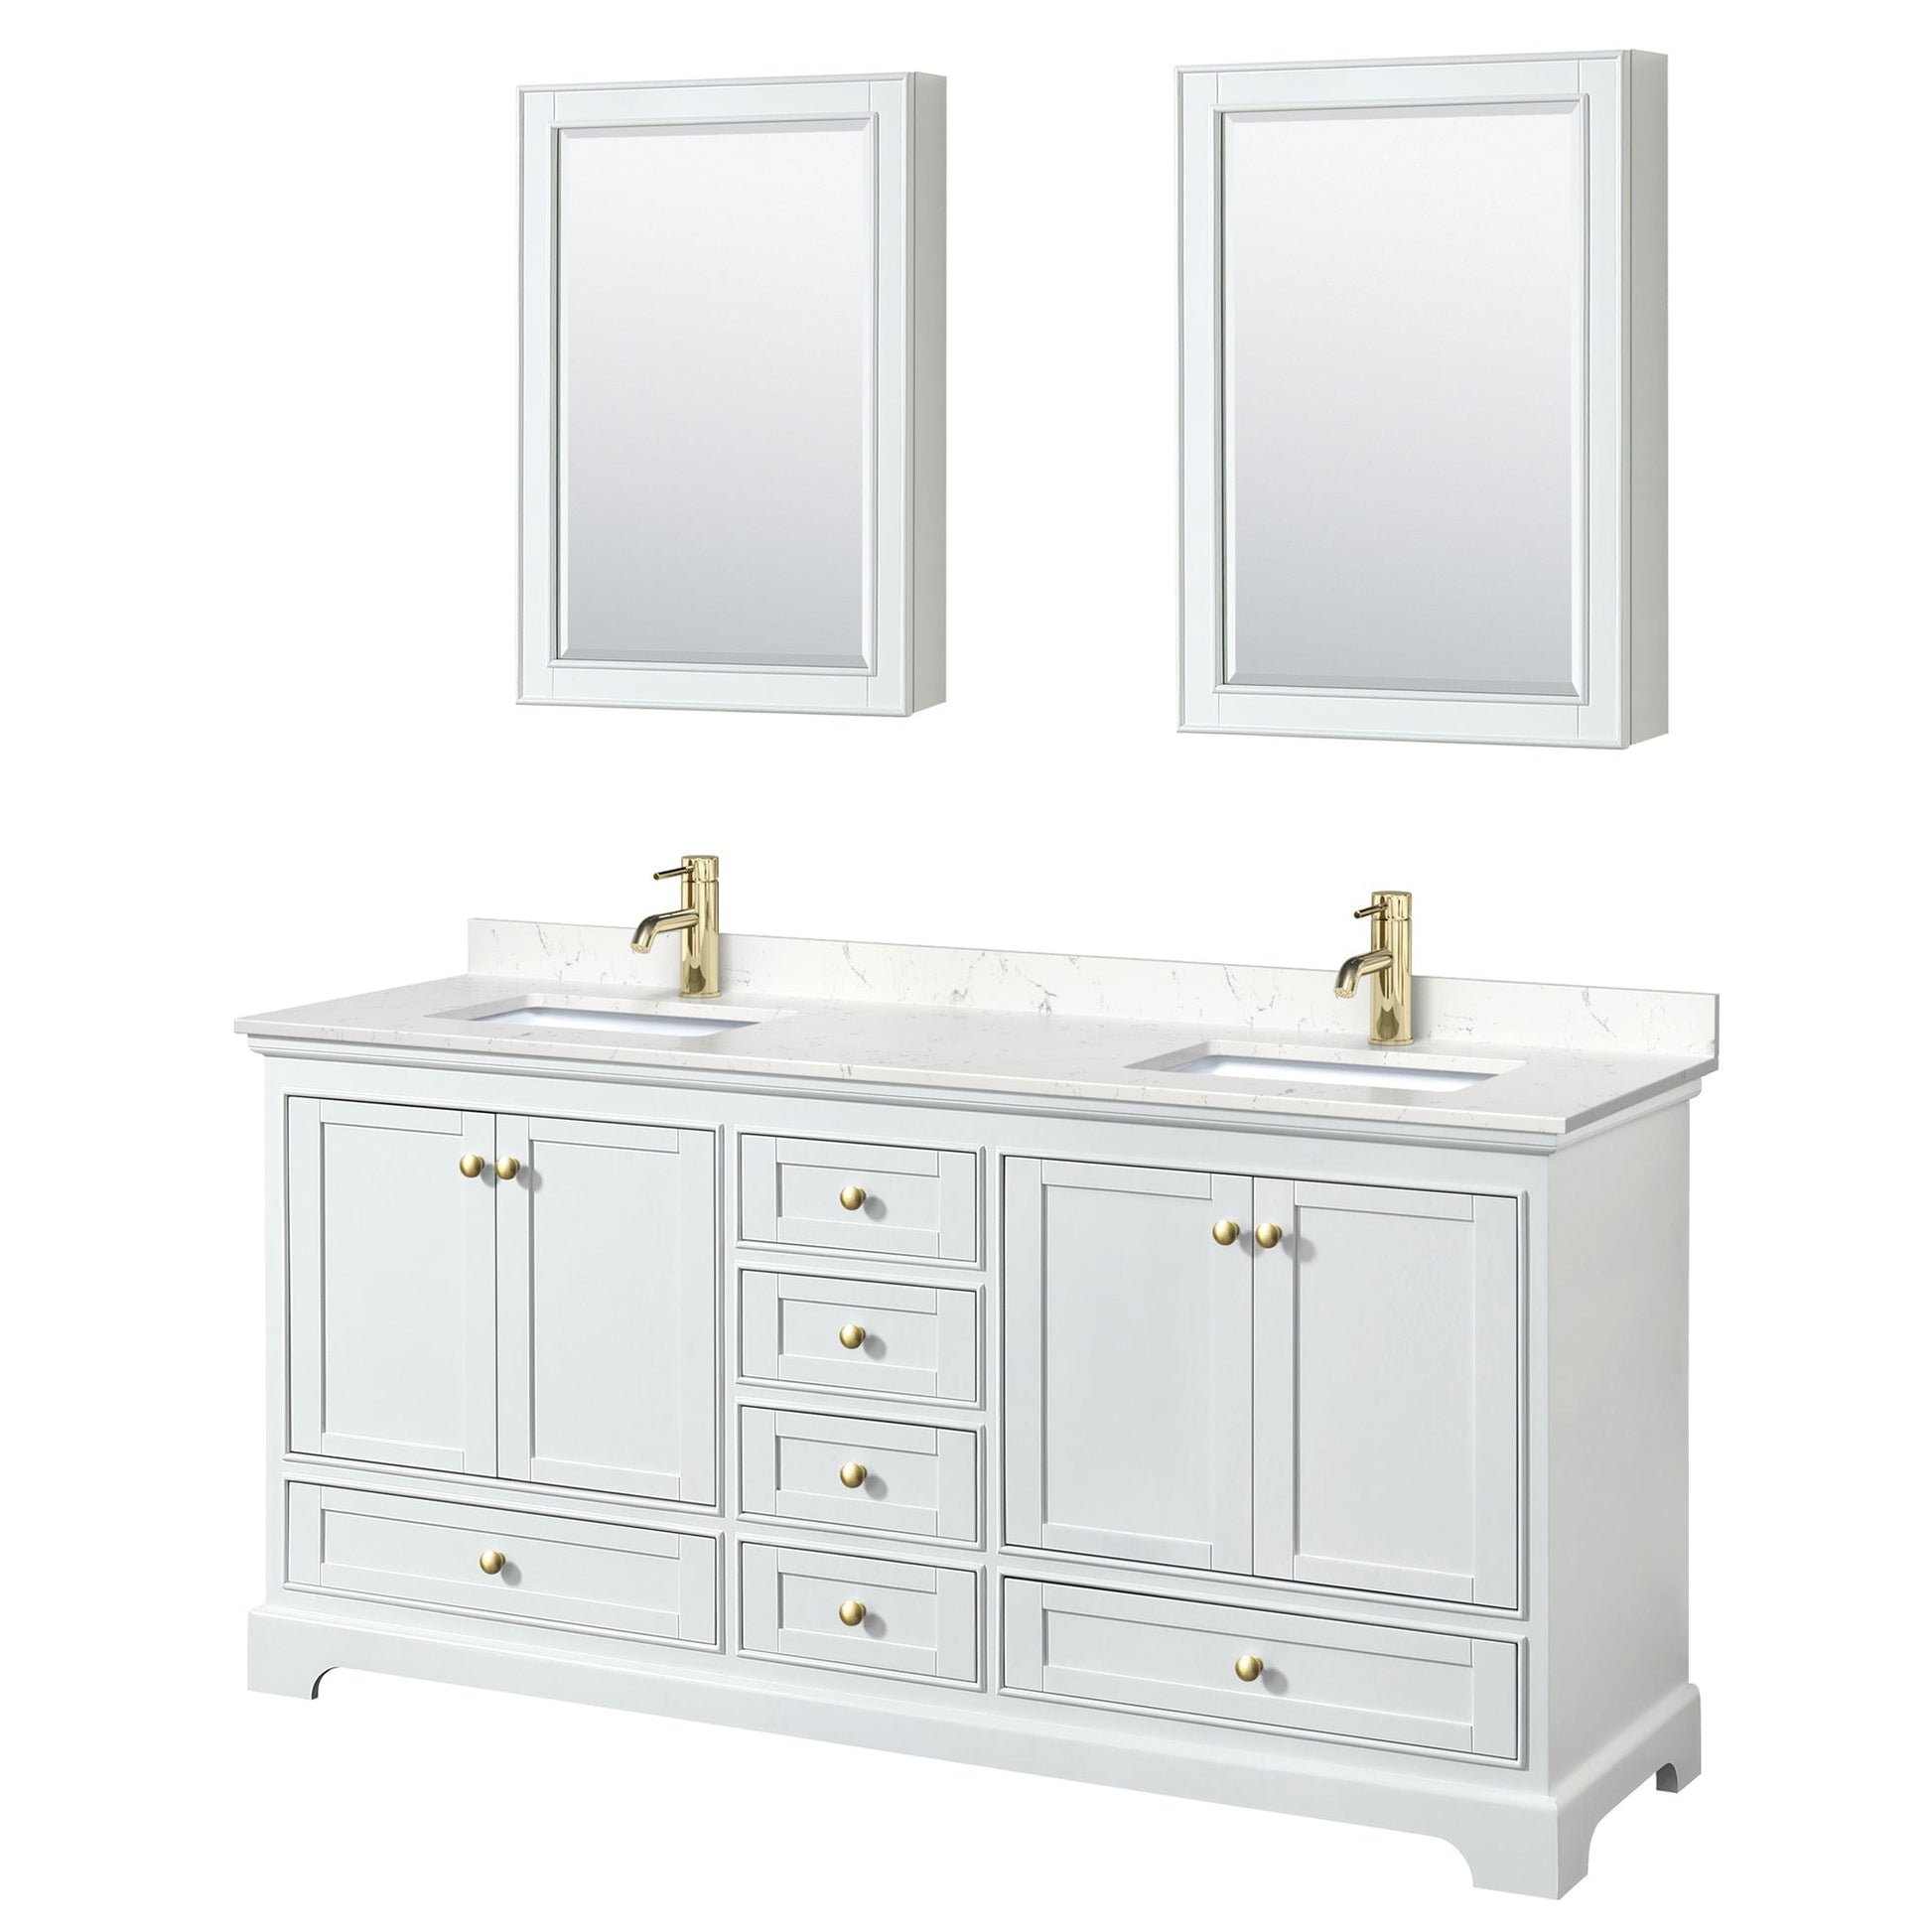 Wyndham Collection Deborah 72" Double Bathroom Vanity in White, Carrara Cultured Marble Countertop, Undermount Square Sinks, Brushed Gold Trim, Medicine Cabinet